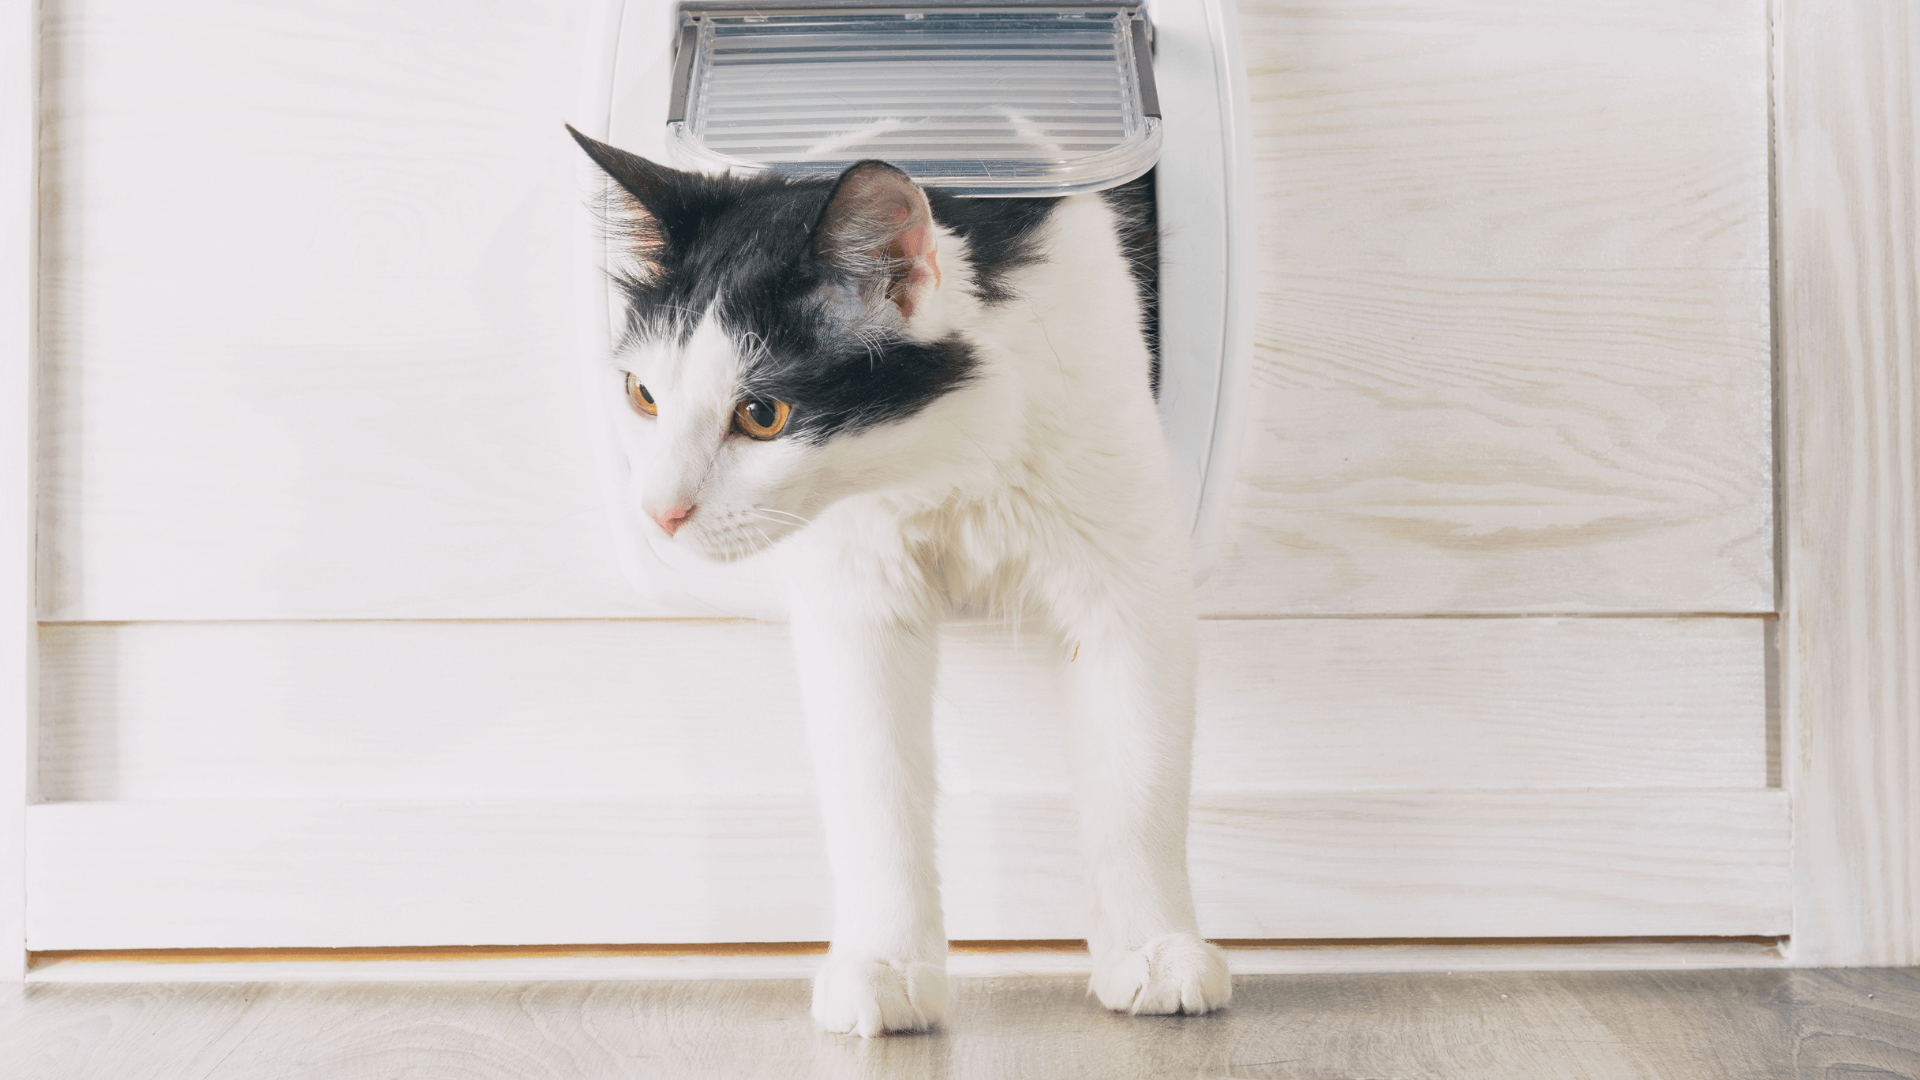 cat door alternative to to keep baby out of litter box - blog image